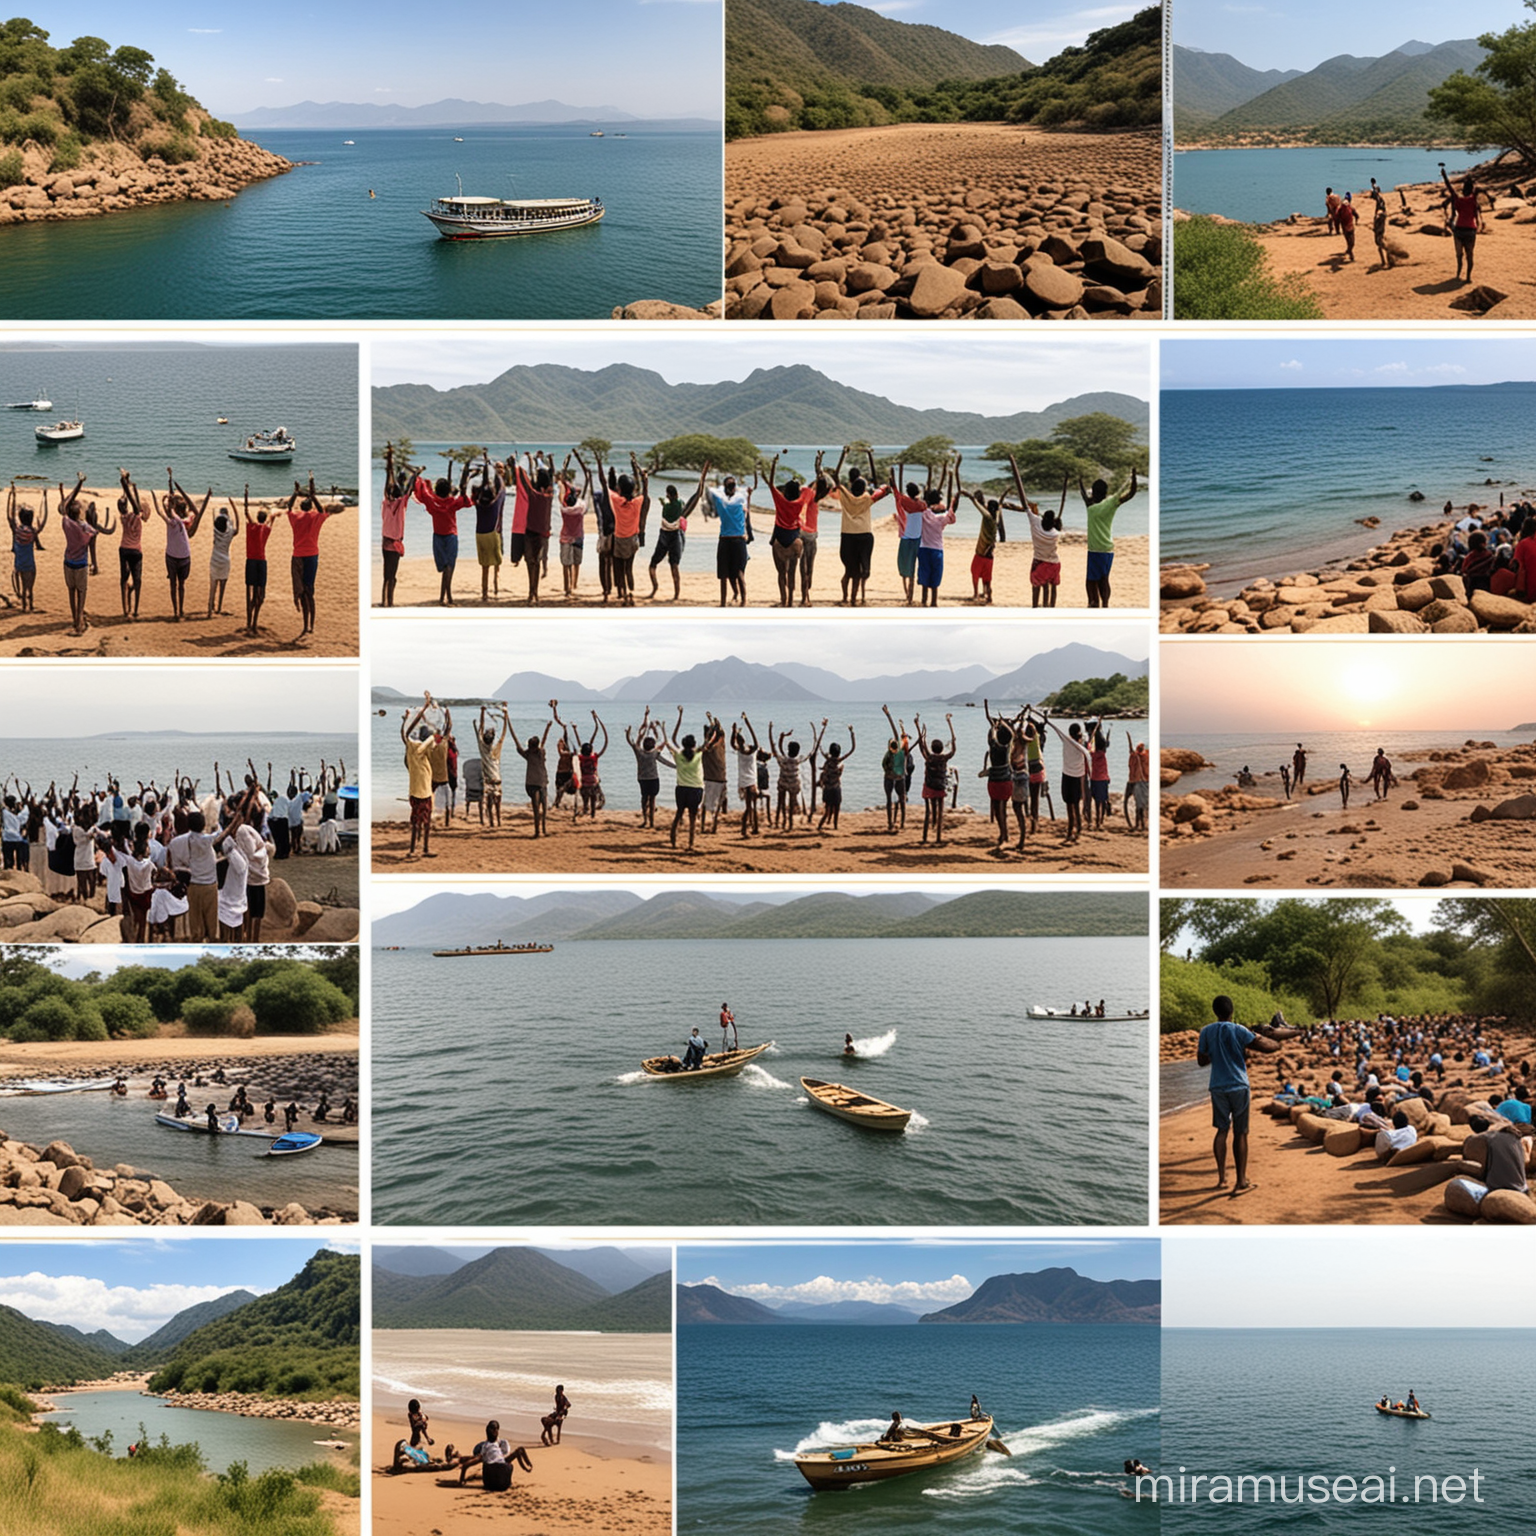 Please build a picture collage of the highlights in Malawi including lake Malawi for the age group 25 to 40. Motivate with the pictures to visit Malawi